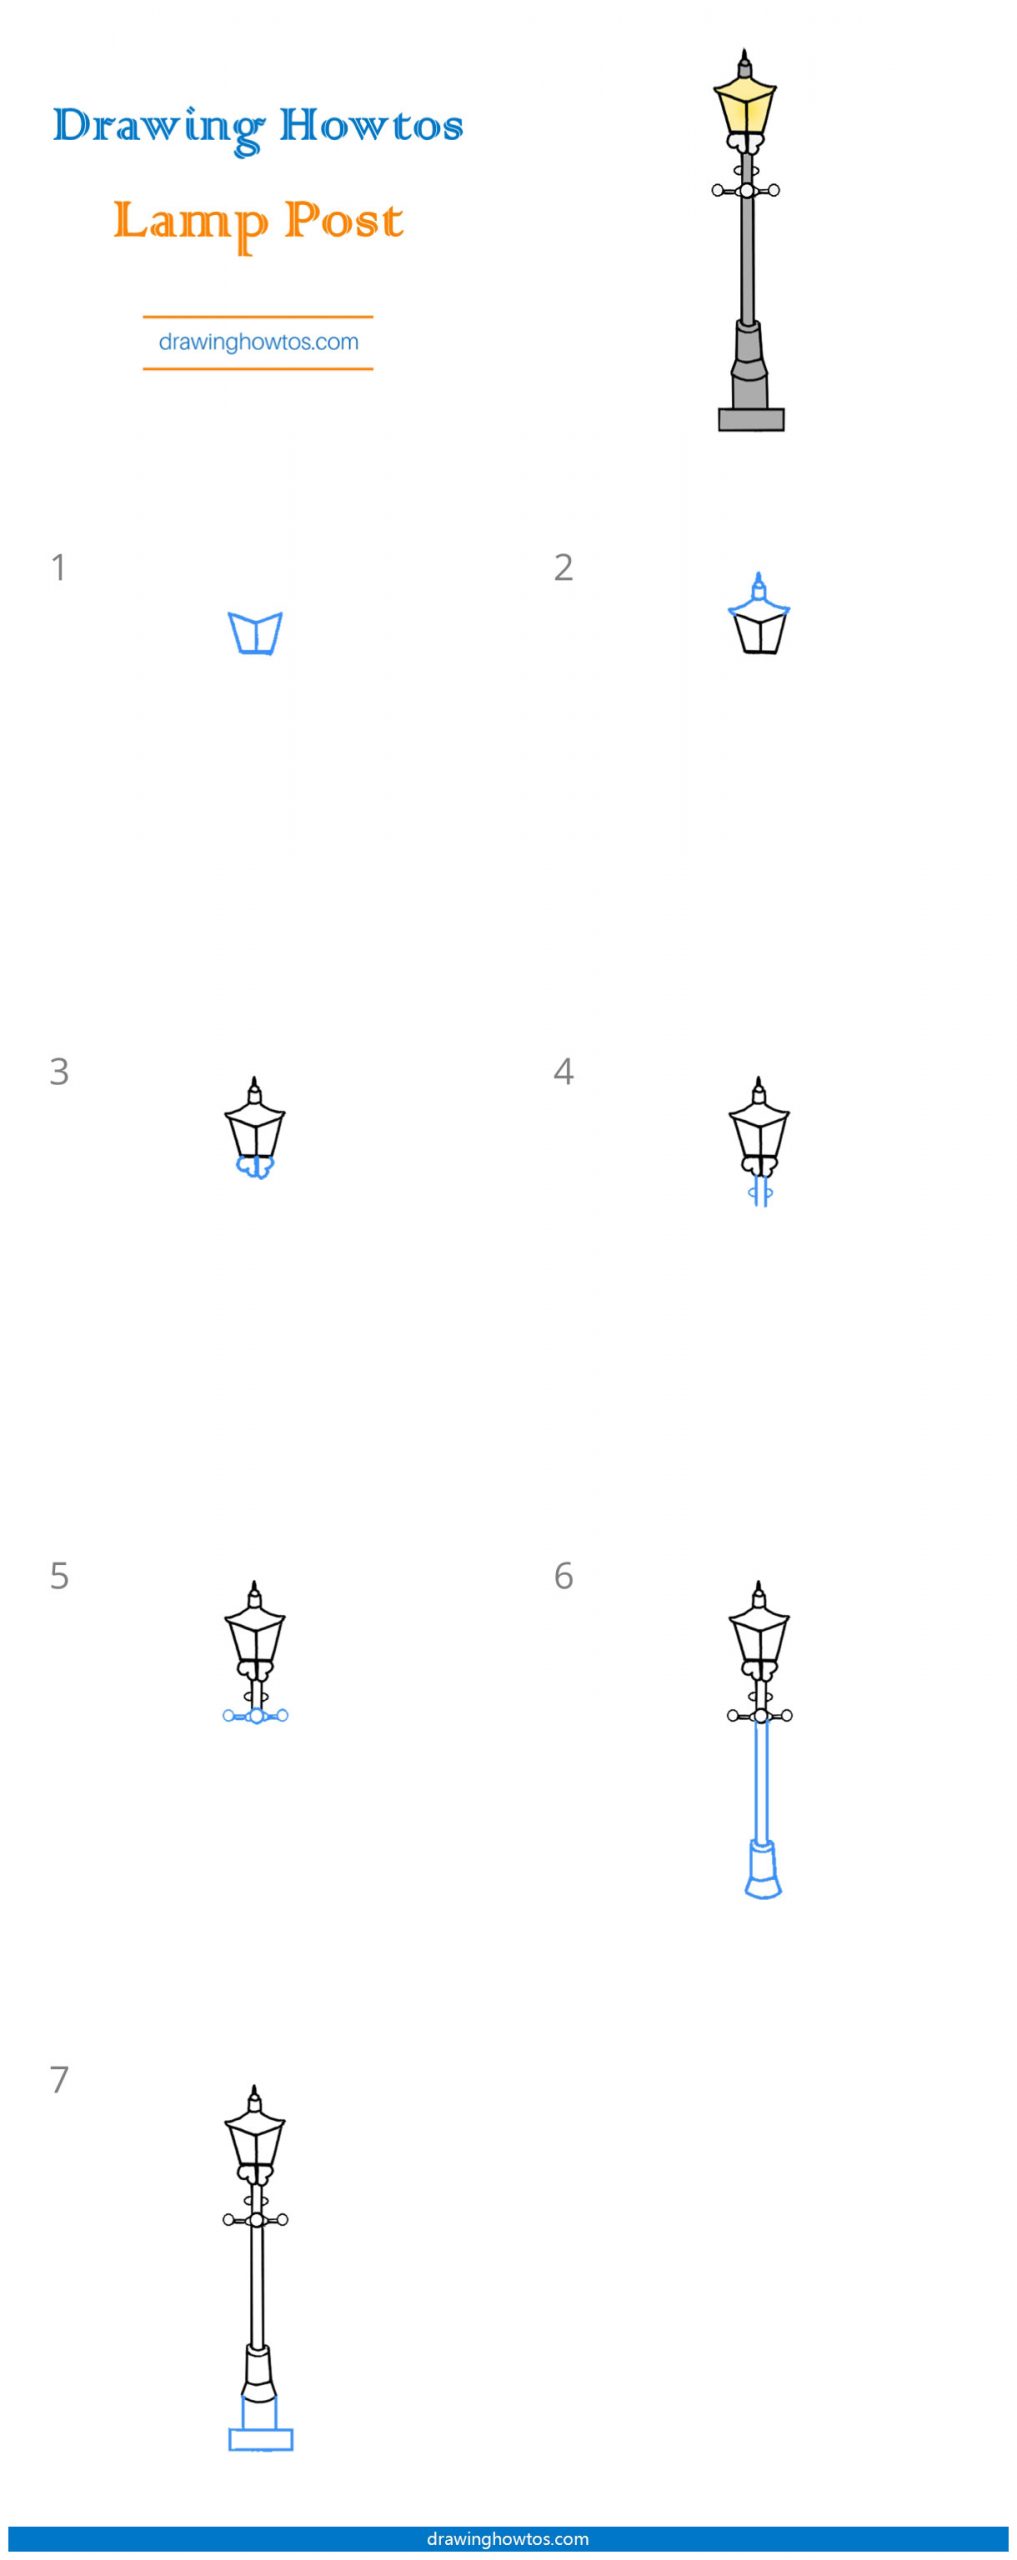 How to Draw a Lamp Post Step by Step